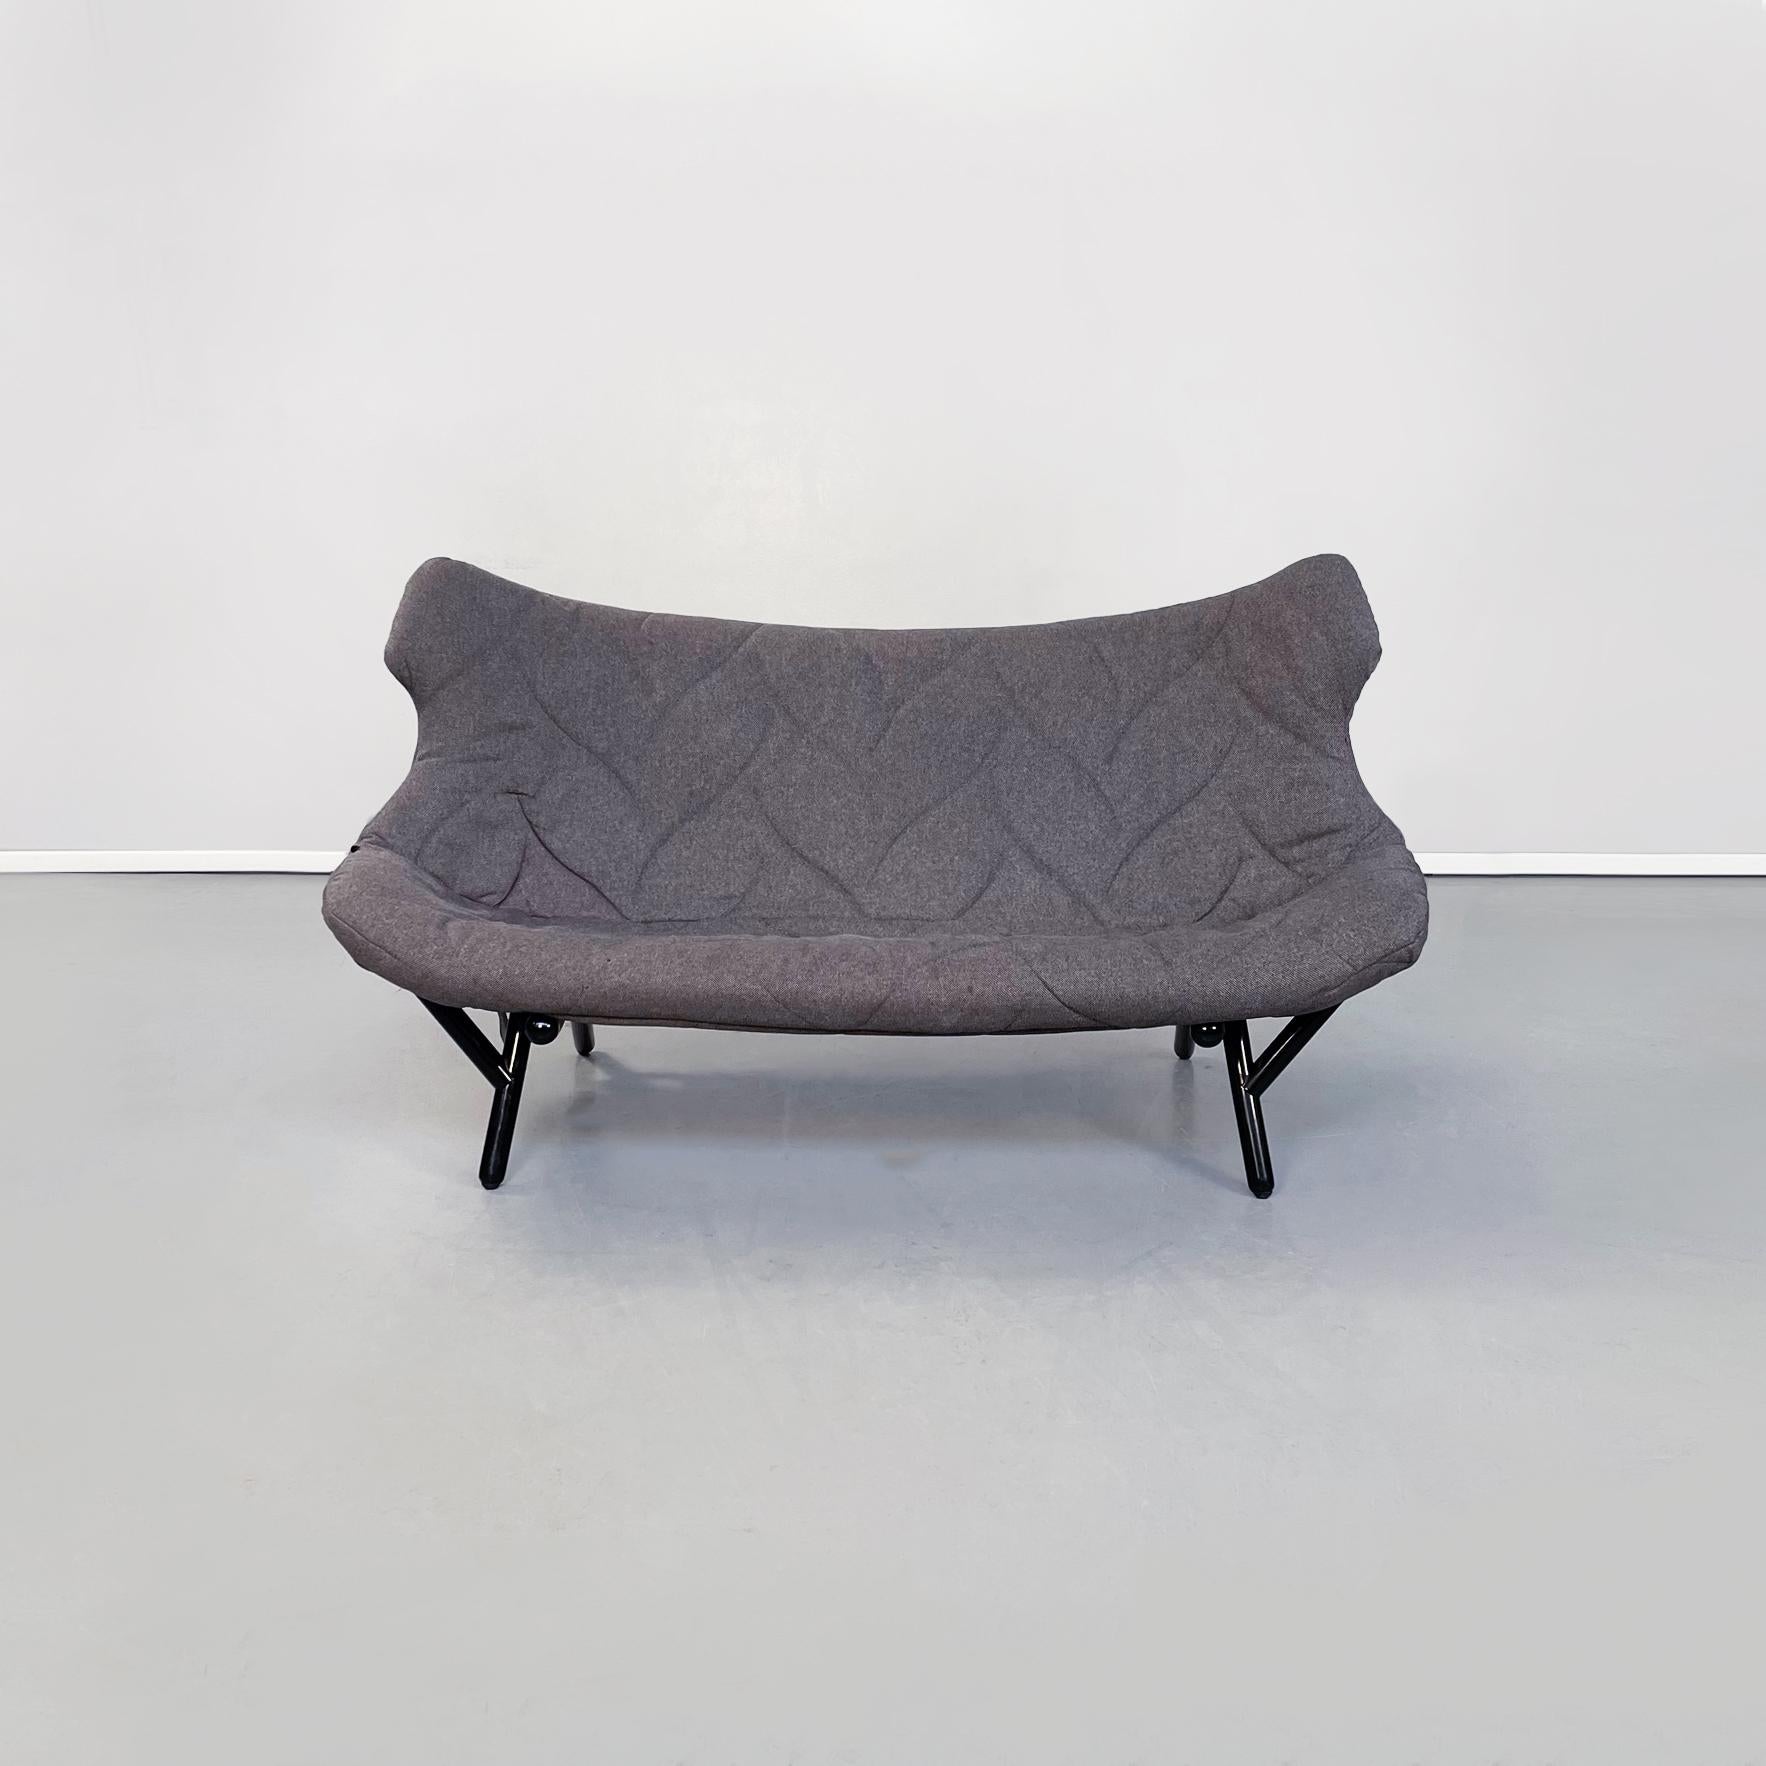 Italian modern Grey fabric and black iron Foliage sofa by Kartell, 2000s
Two seater Foliage sofa with tubular structure in black painted iron. The seat and back are padded with polyurethane foam, covered in gray fabric on which the shapes of leaves